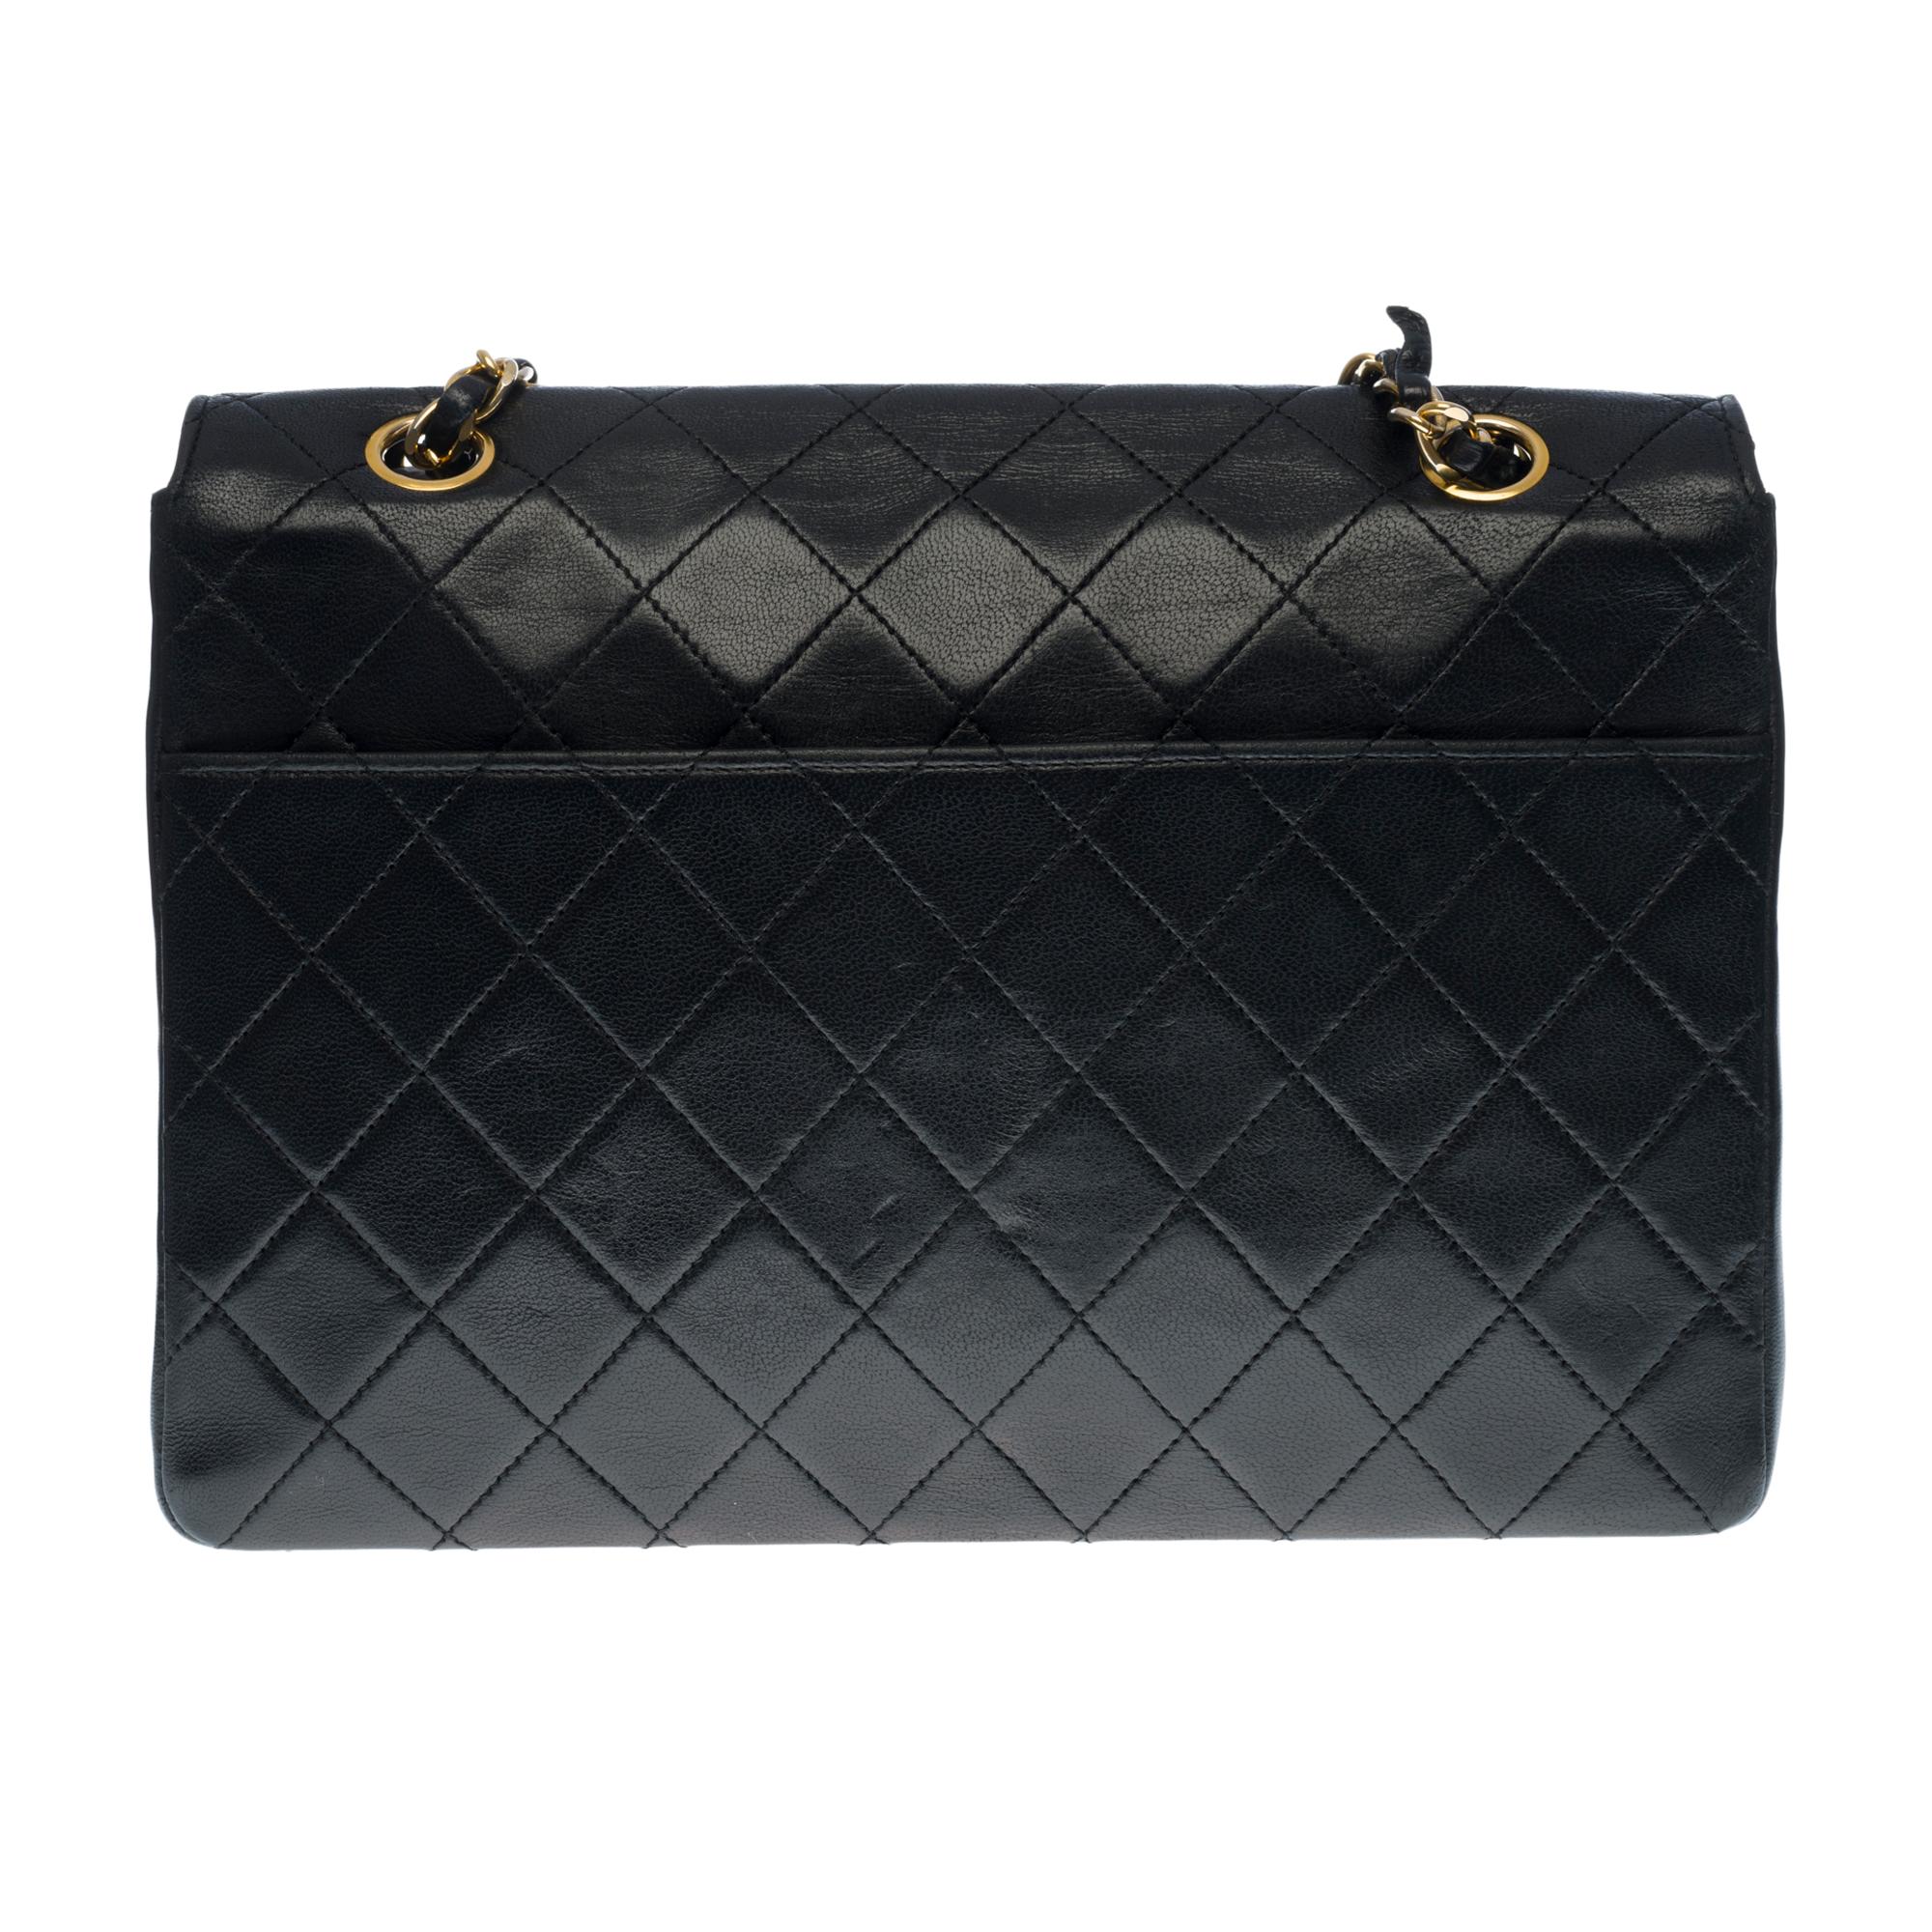 Stunning Chanel Classique Flap bag in black quilted leather, gold-tone metal hardware, a gold-tone metal chain handle intertwined with black leather allowing a shoulder support
Gilded metal logo closure on flap
Lining in burgundy leather, one zipped